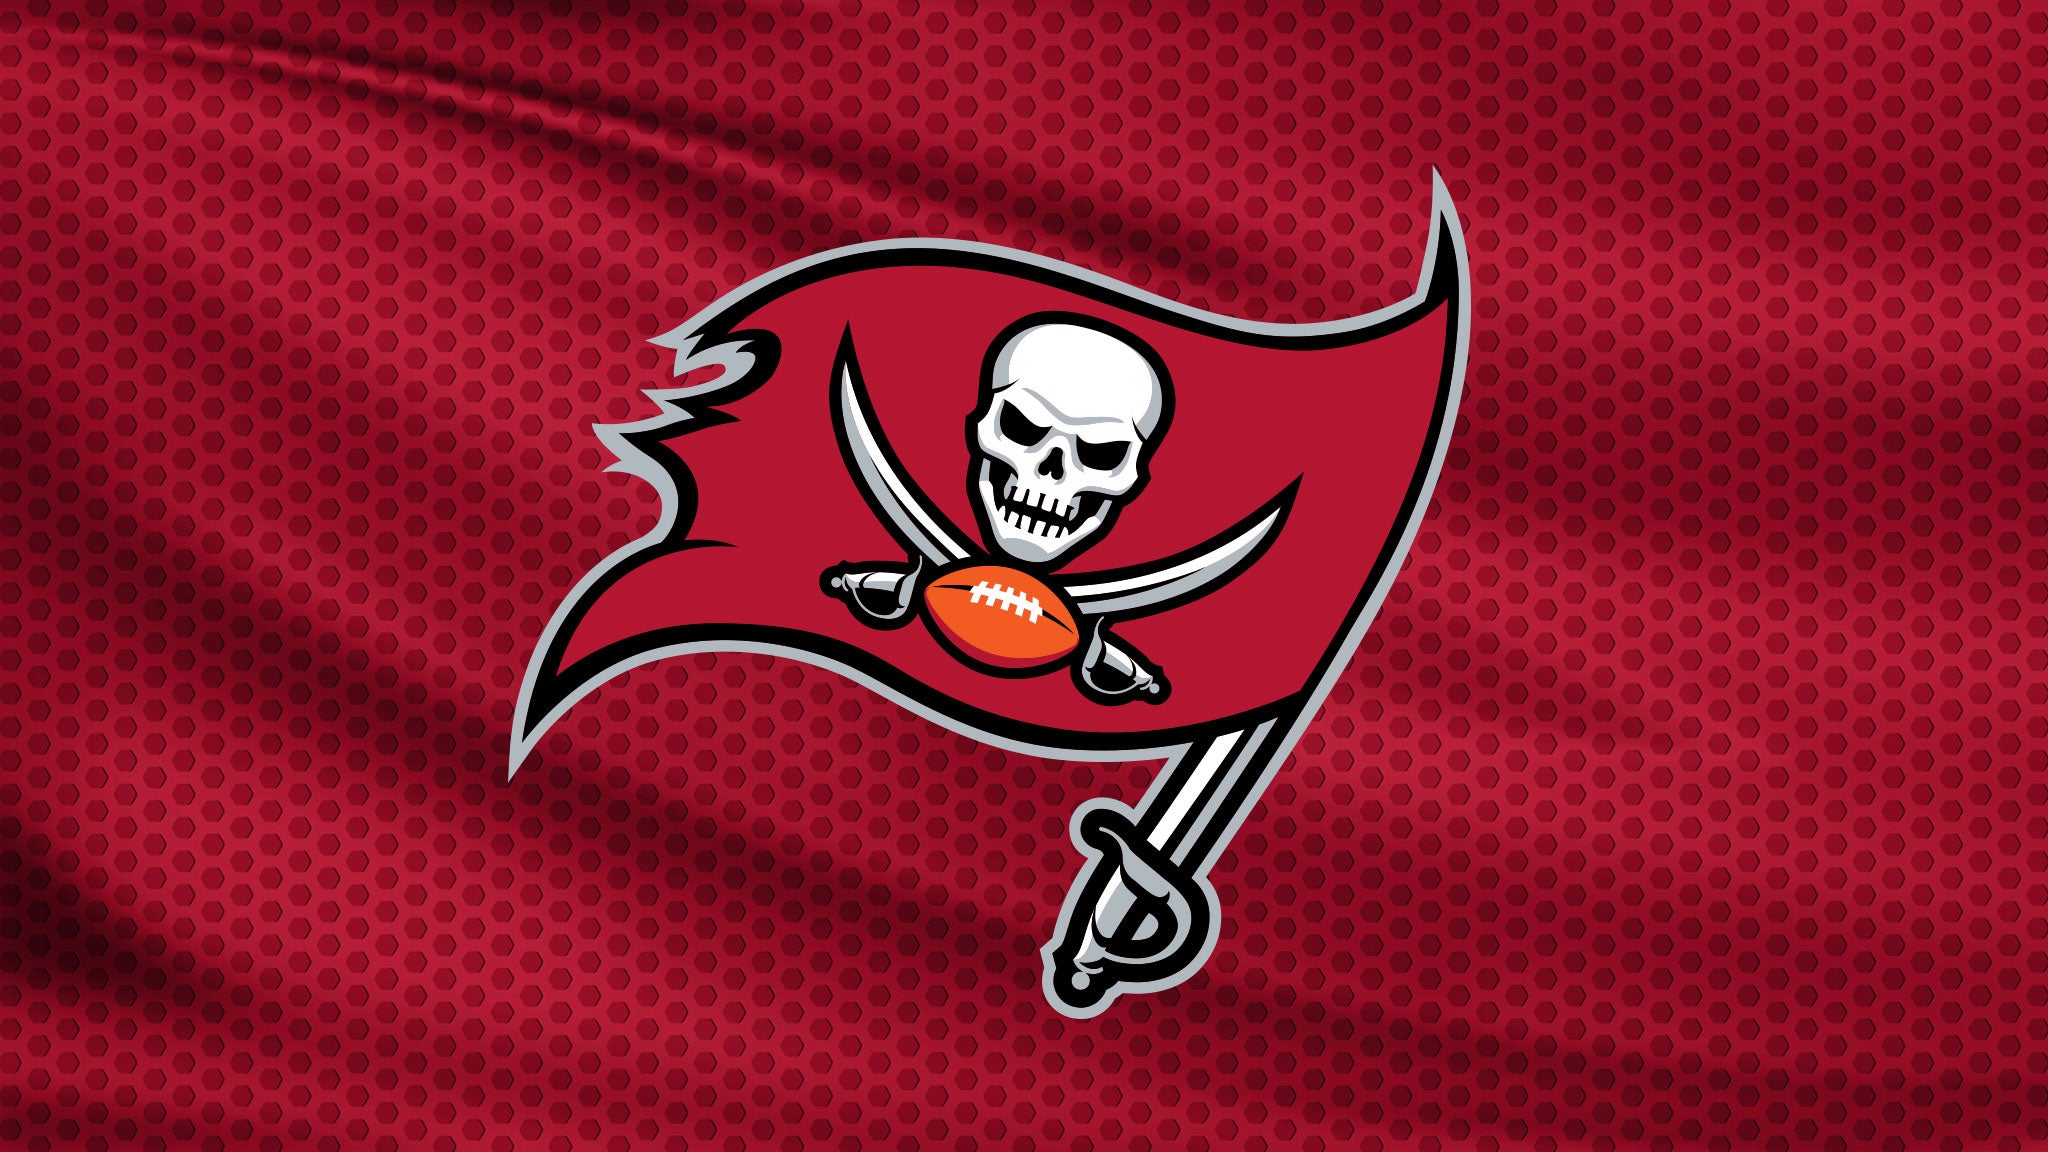 Tampa Bay Buccaneers v TBD - Divisional in Tampa promo photo for Resale presale offer code